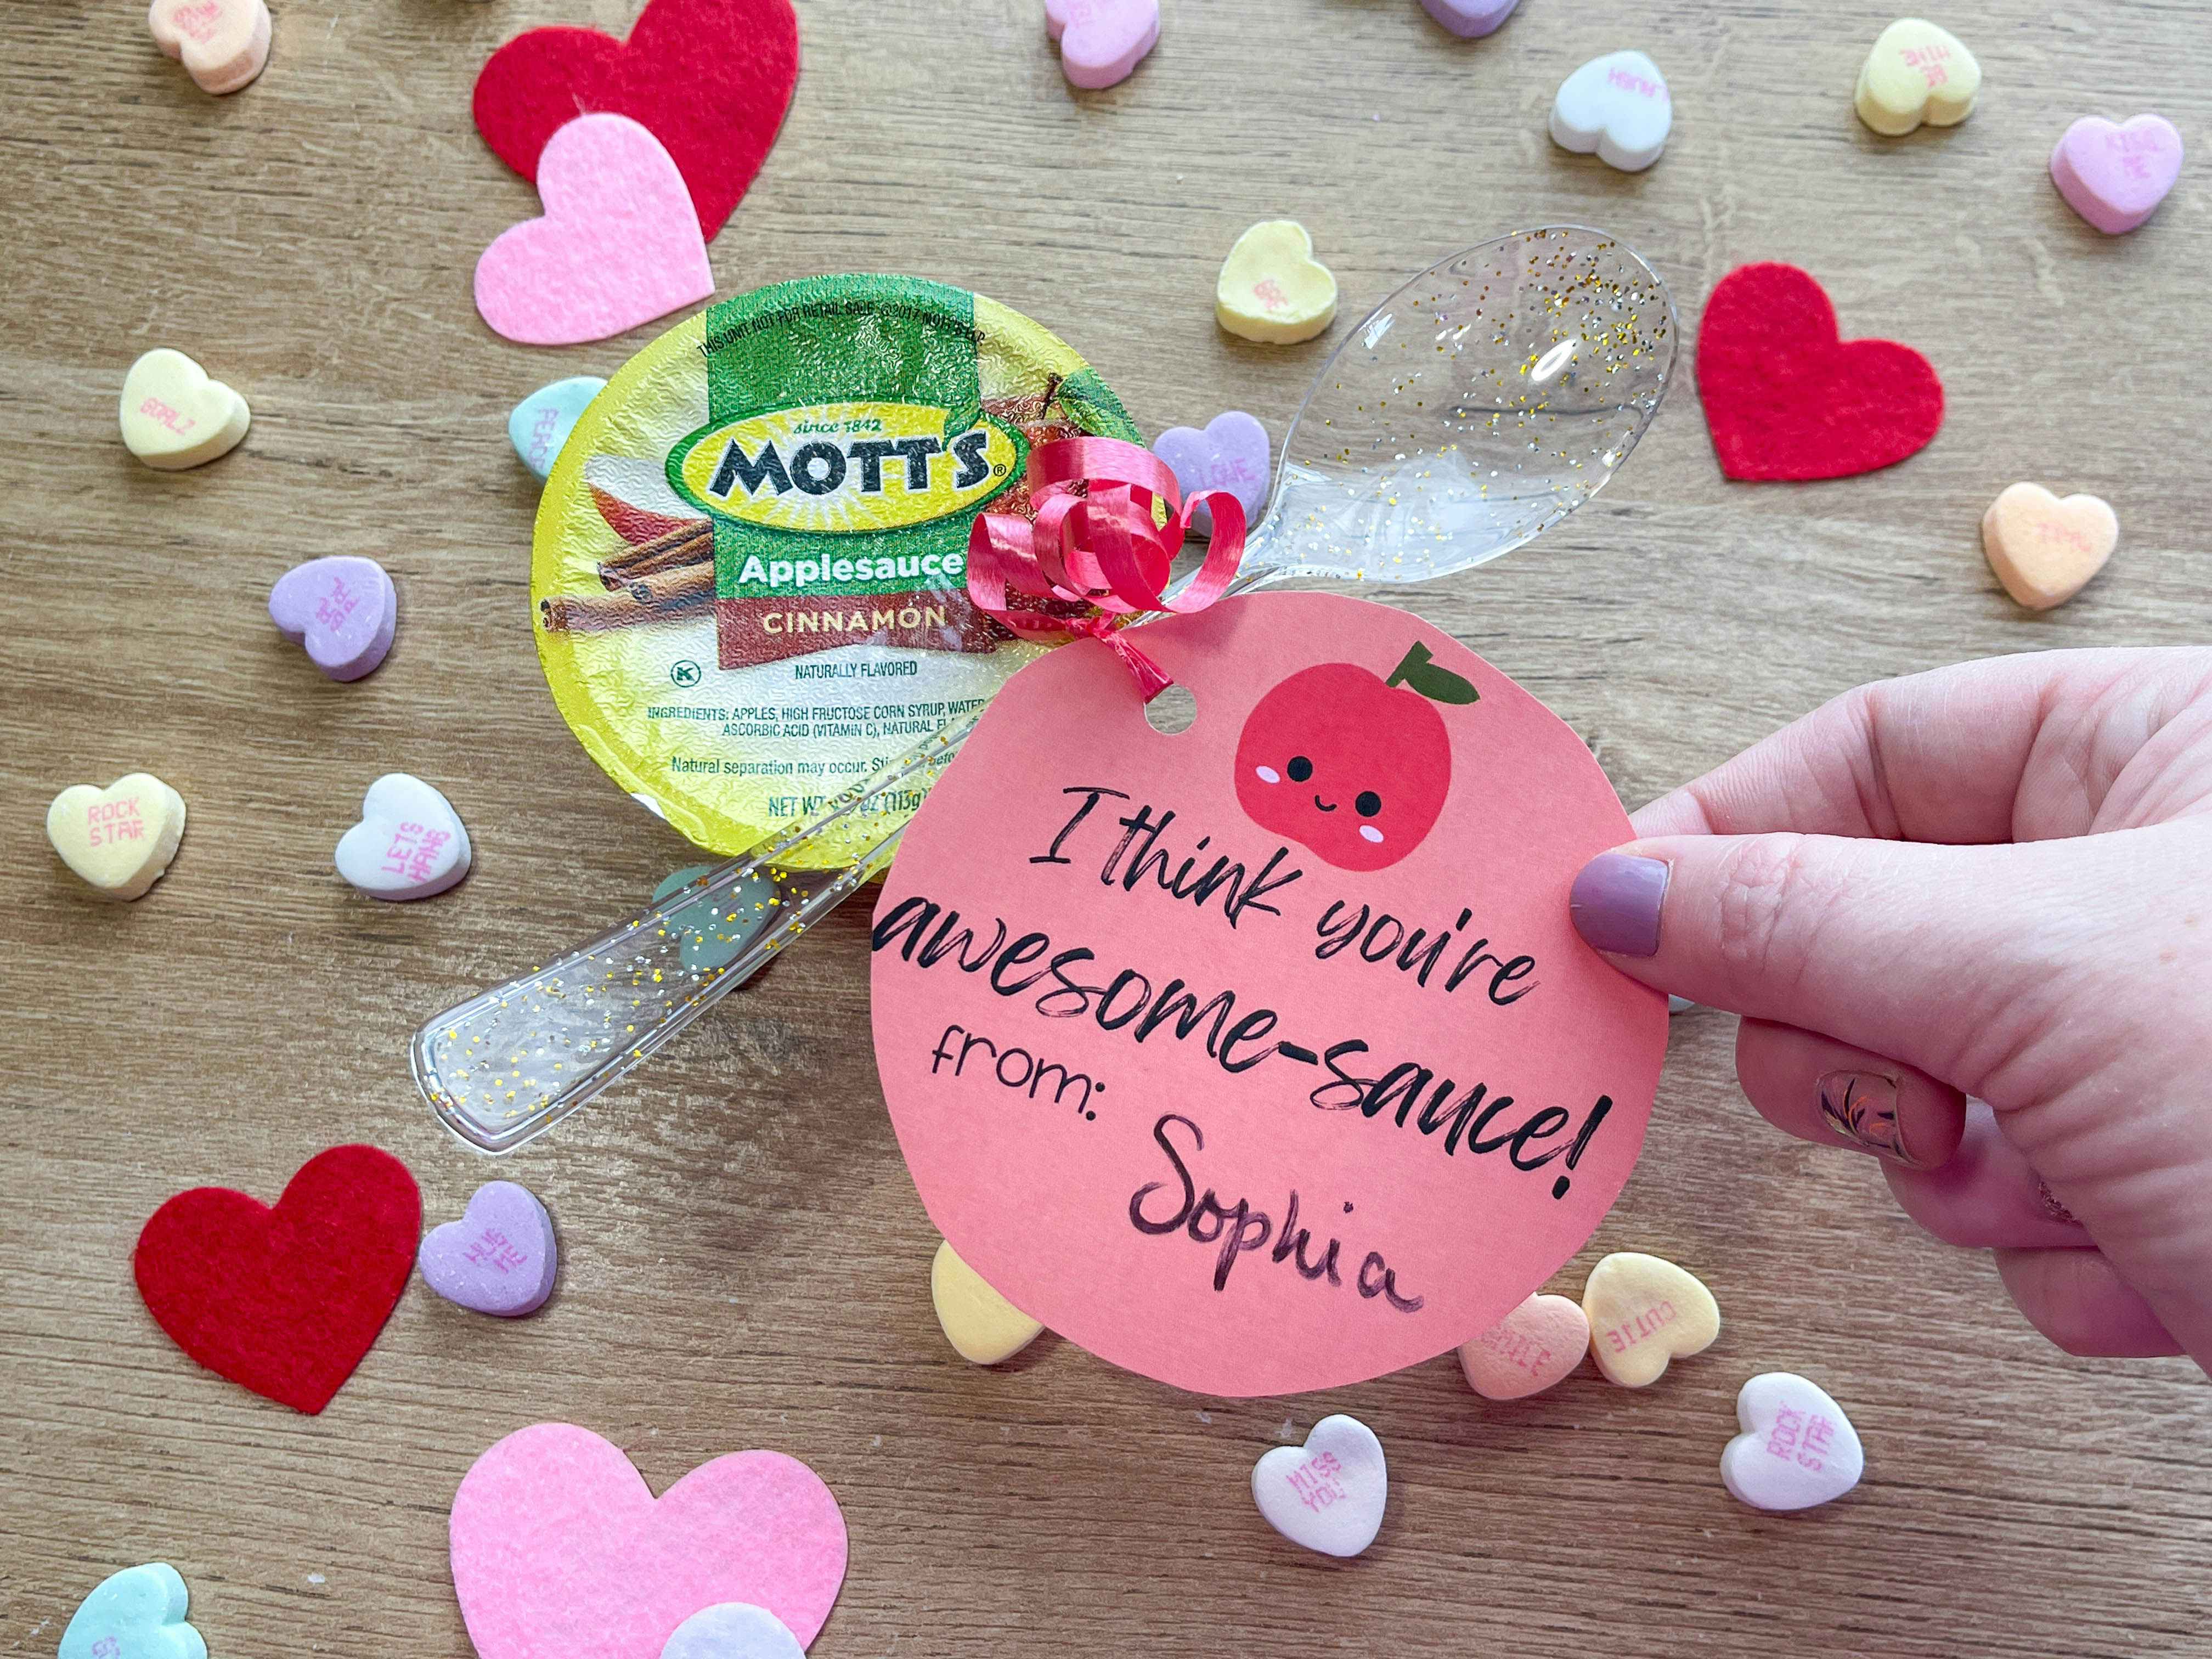 These Free Valentine Craft Kits Are Perfect For Kids - The Krazy Coupon Lady